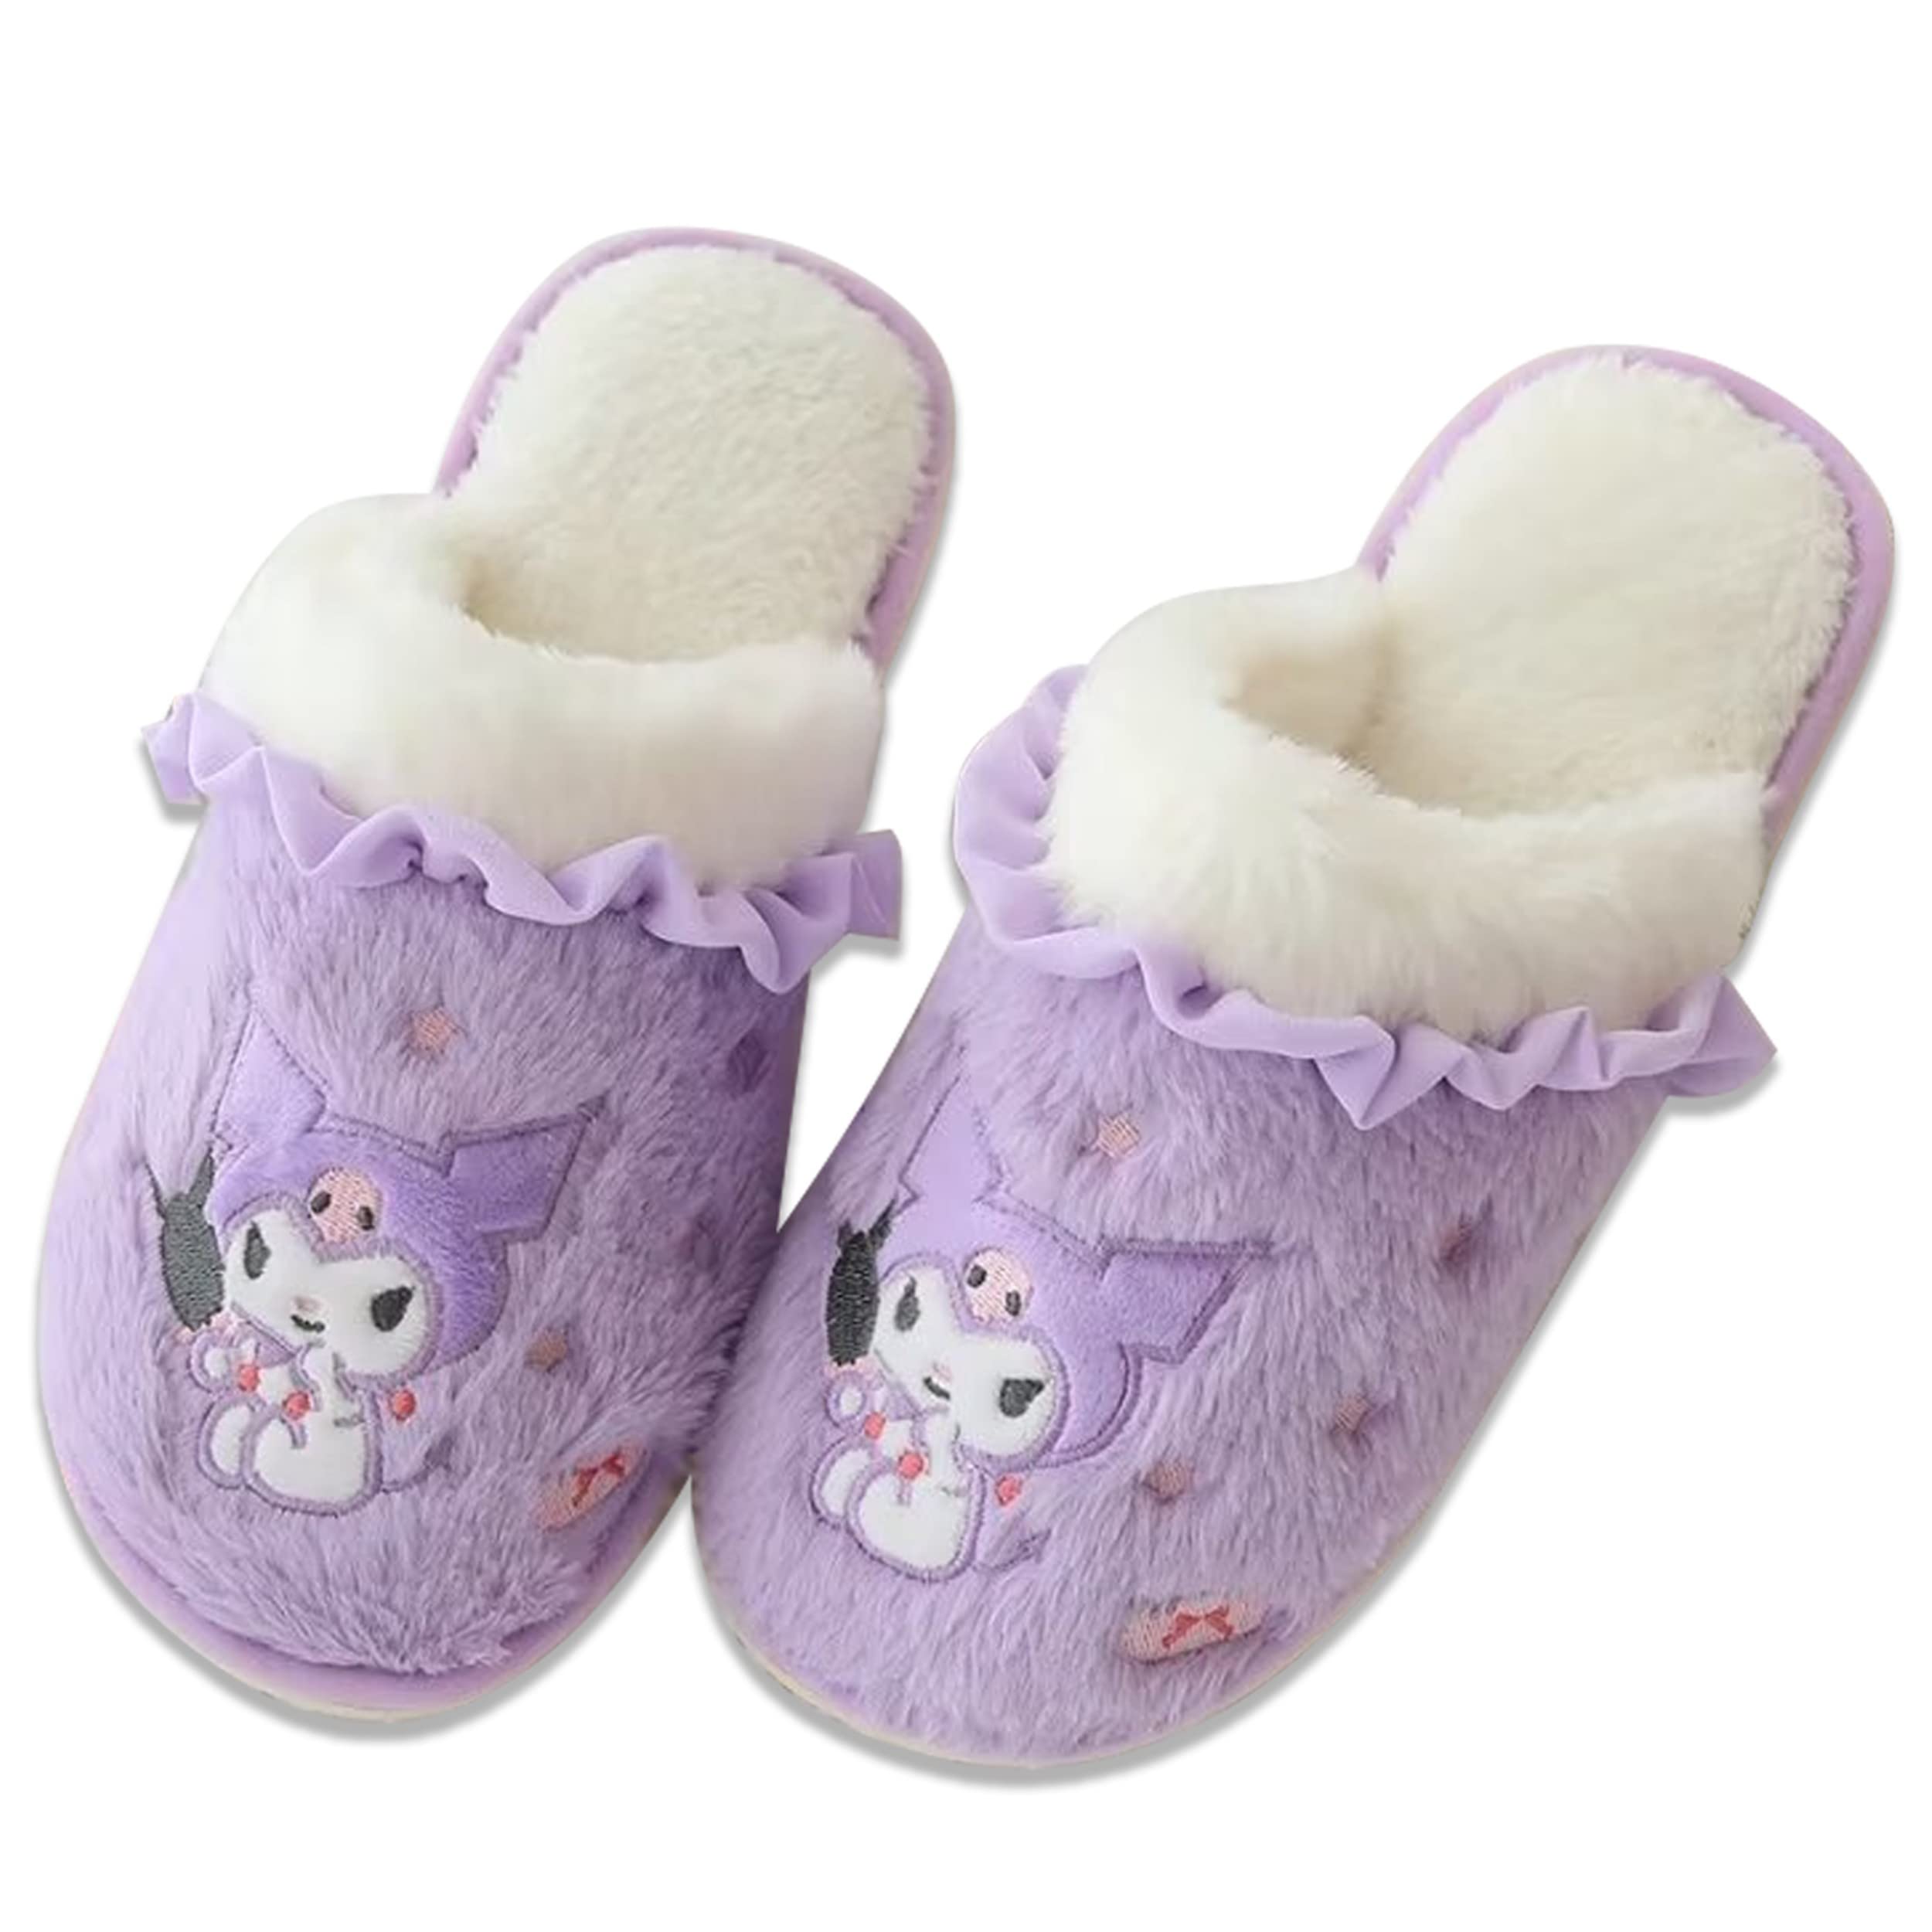 Roffatide Anime Cute Plush Open Back Floor Slippers Indoor Shoes Fuzzy Slippers with Rubber Sole for Women